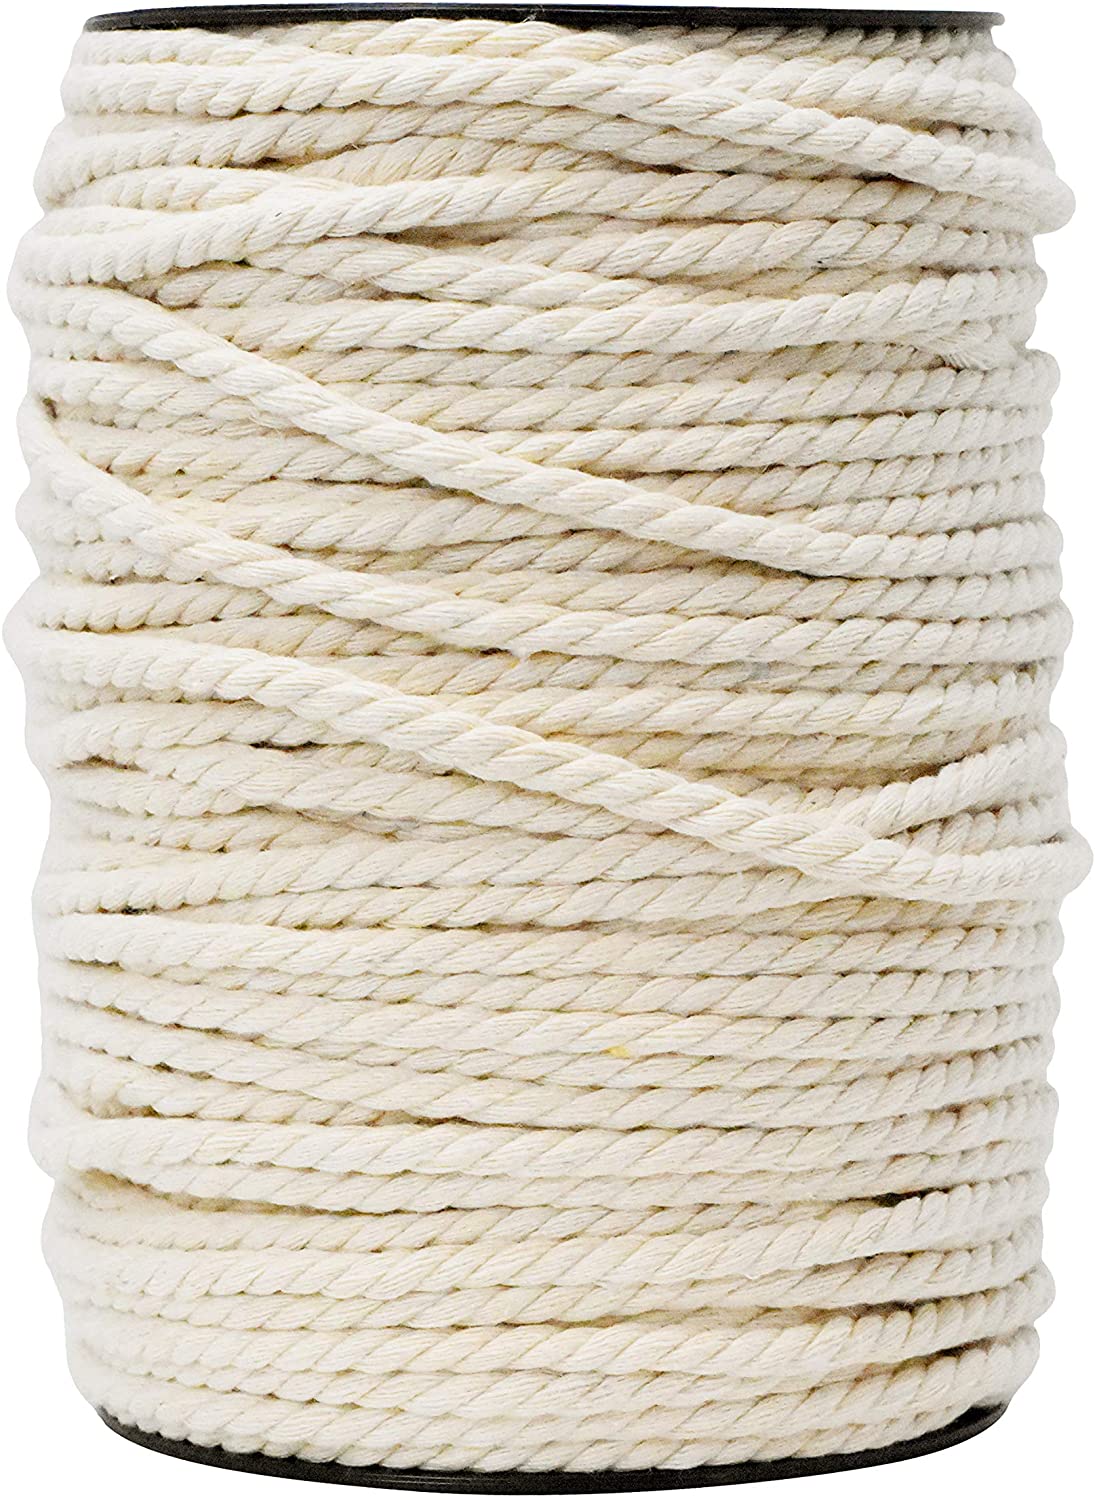 Twisted Cotton Rope (3/4 in x 100 ft) Natural Rope Thick Triple-Strand Rope for Crafts, Landscaping, Decorations,Hanging Swing, Macrame, Sports Tug